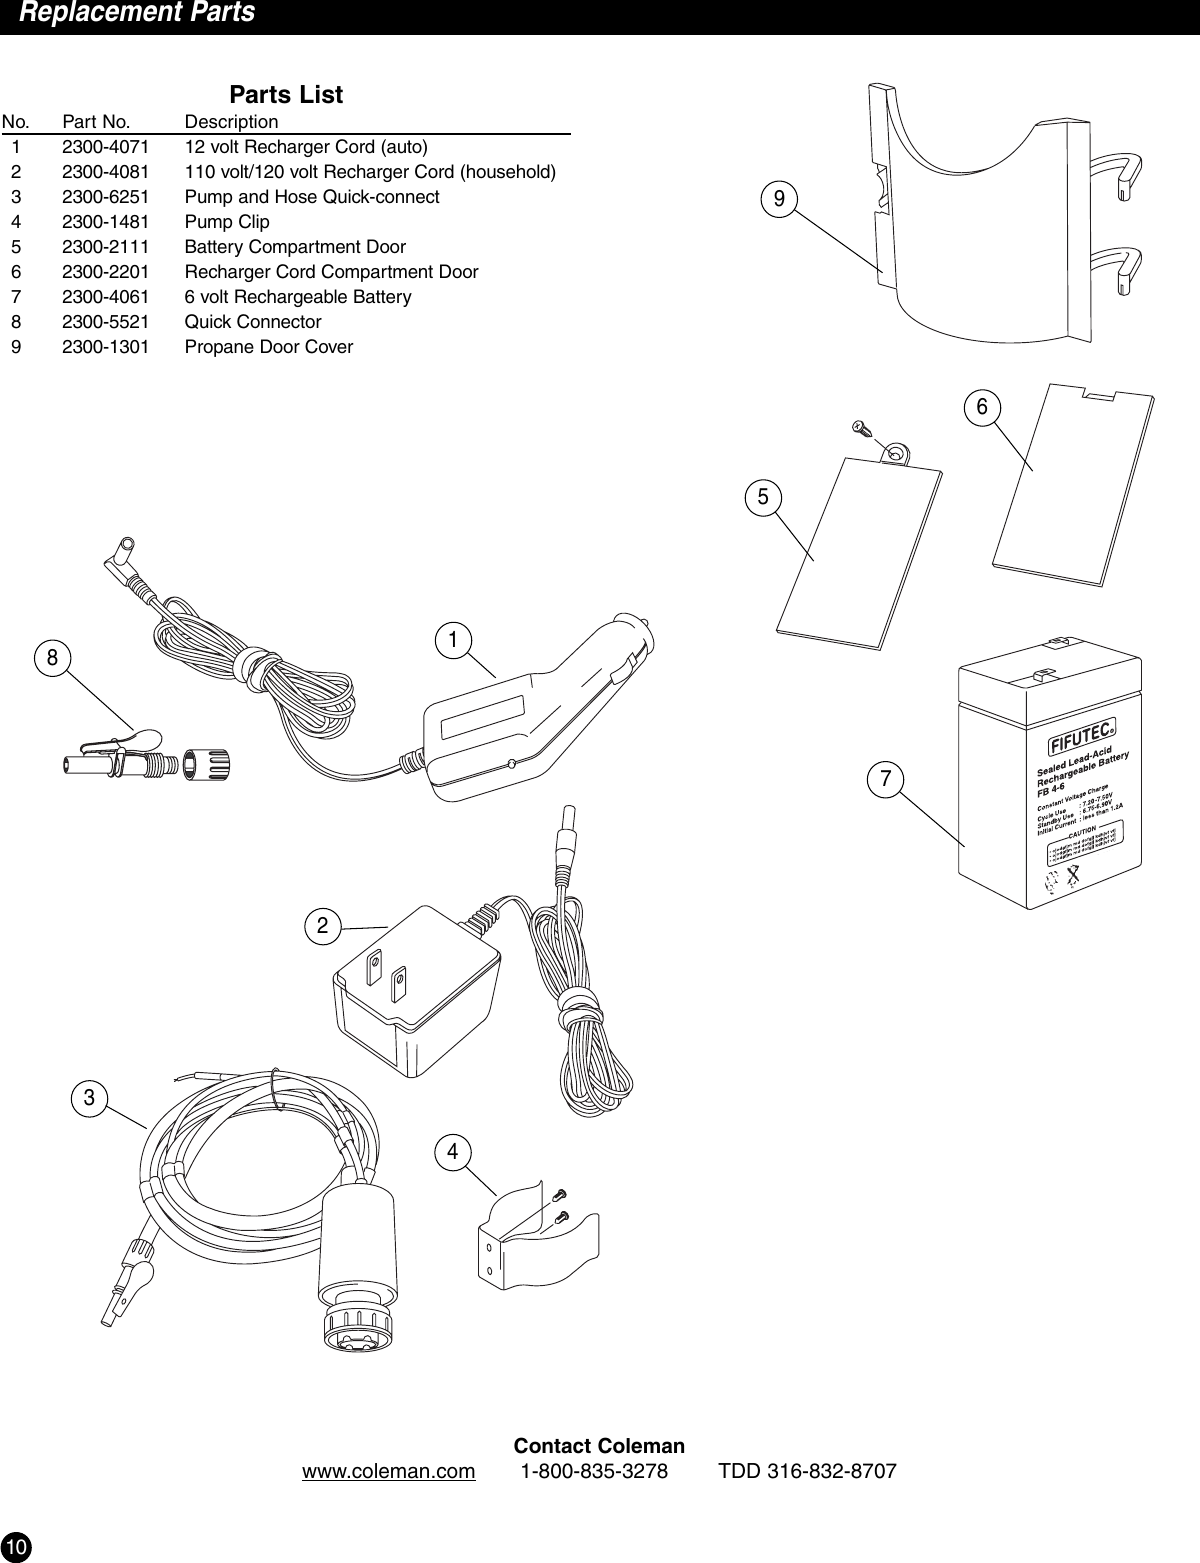 Page 10 of 12 - Coleman Coleman-2300-Series-Users-Manual- 2300B050 - Hot Water On Demand  Coleman-2300-series-users-manual